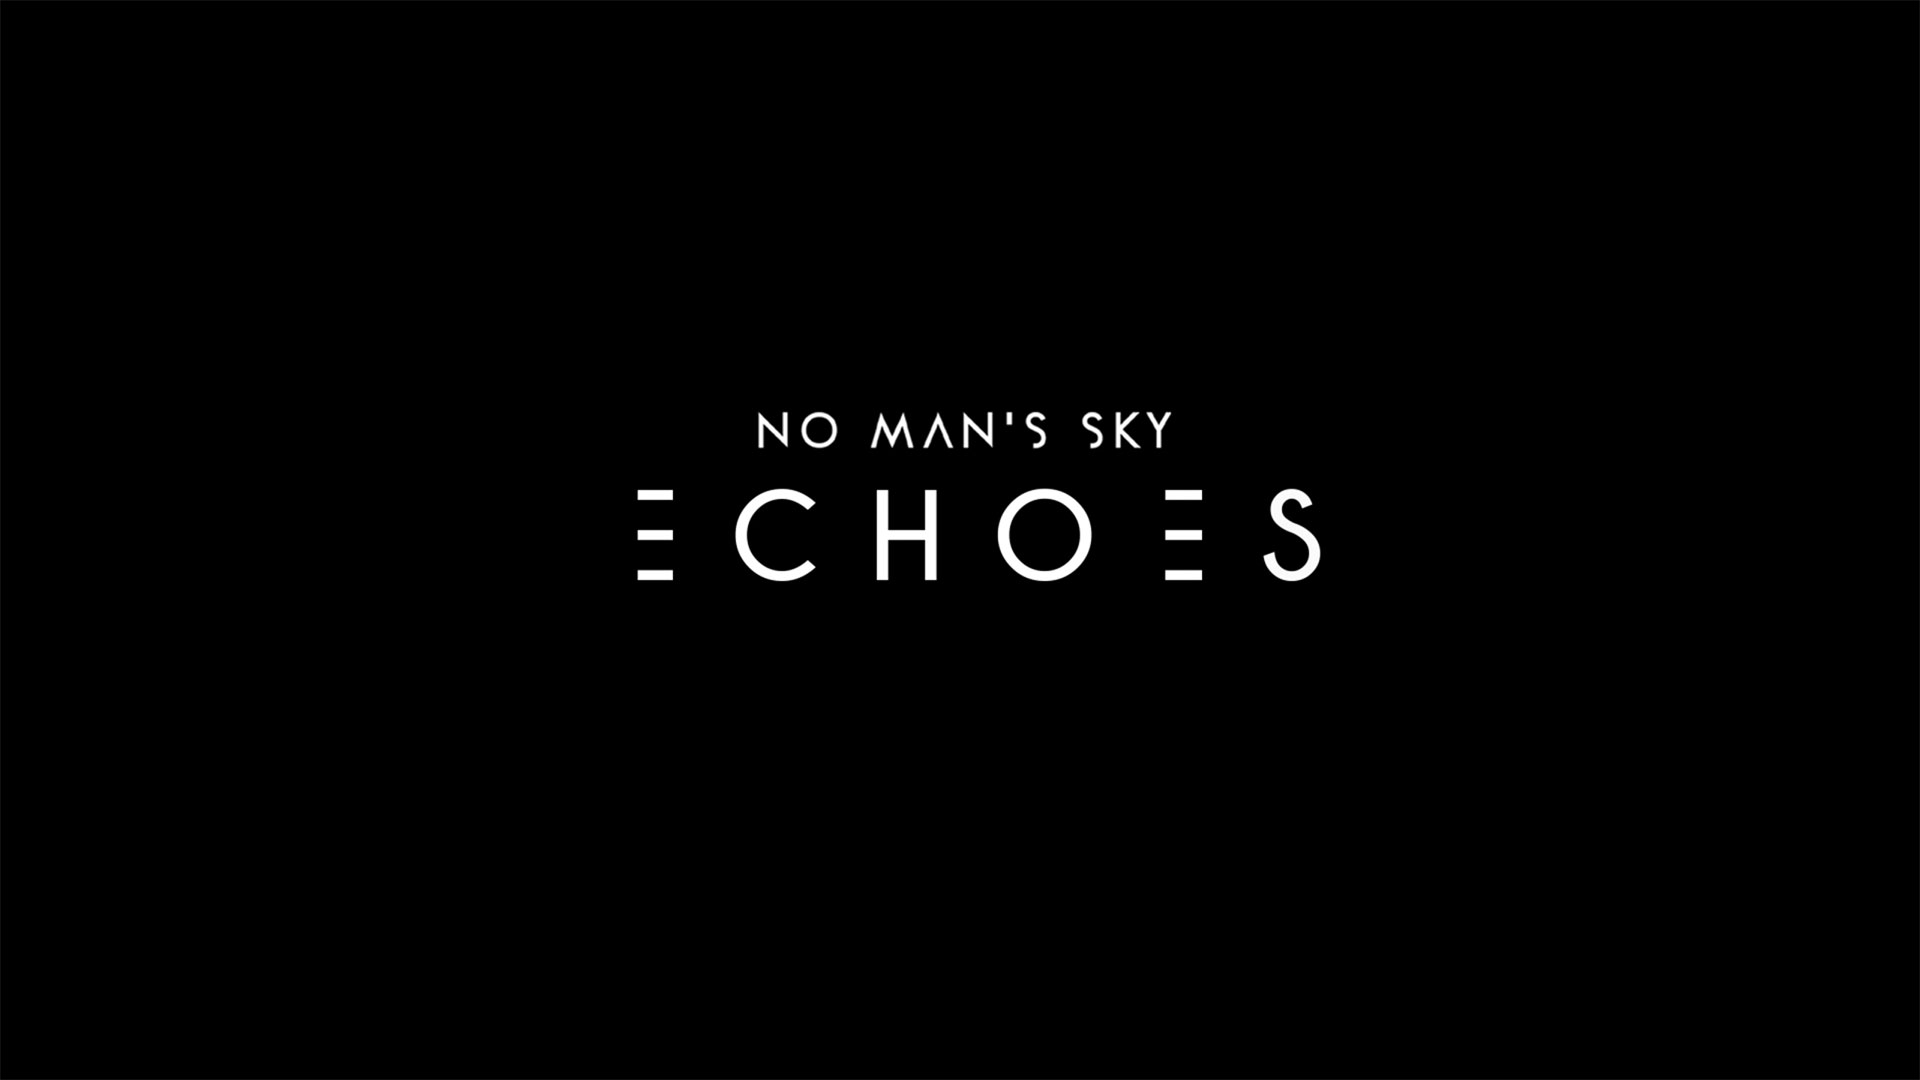 No Man's Sky is teasing its next major update, titled Echoes